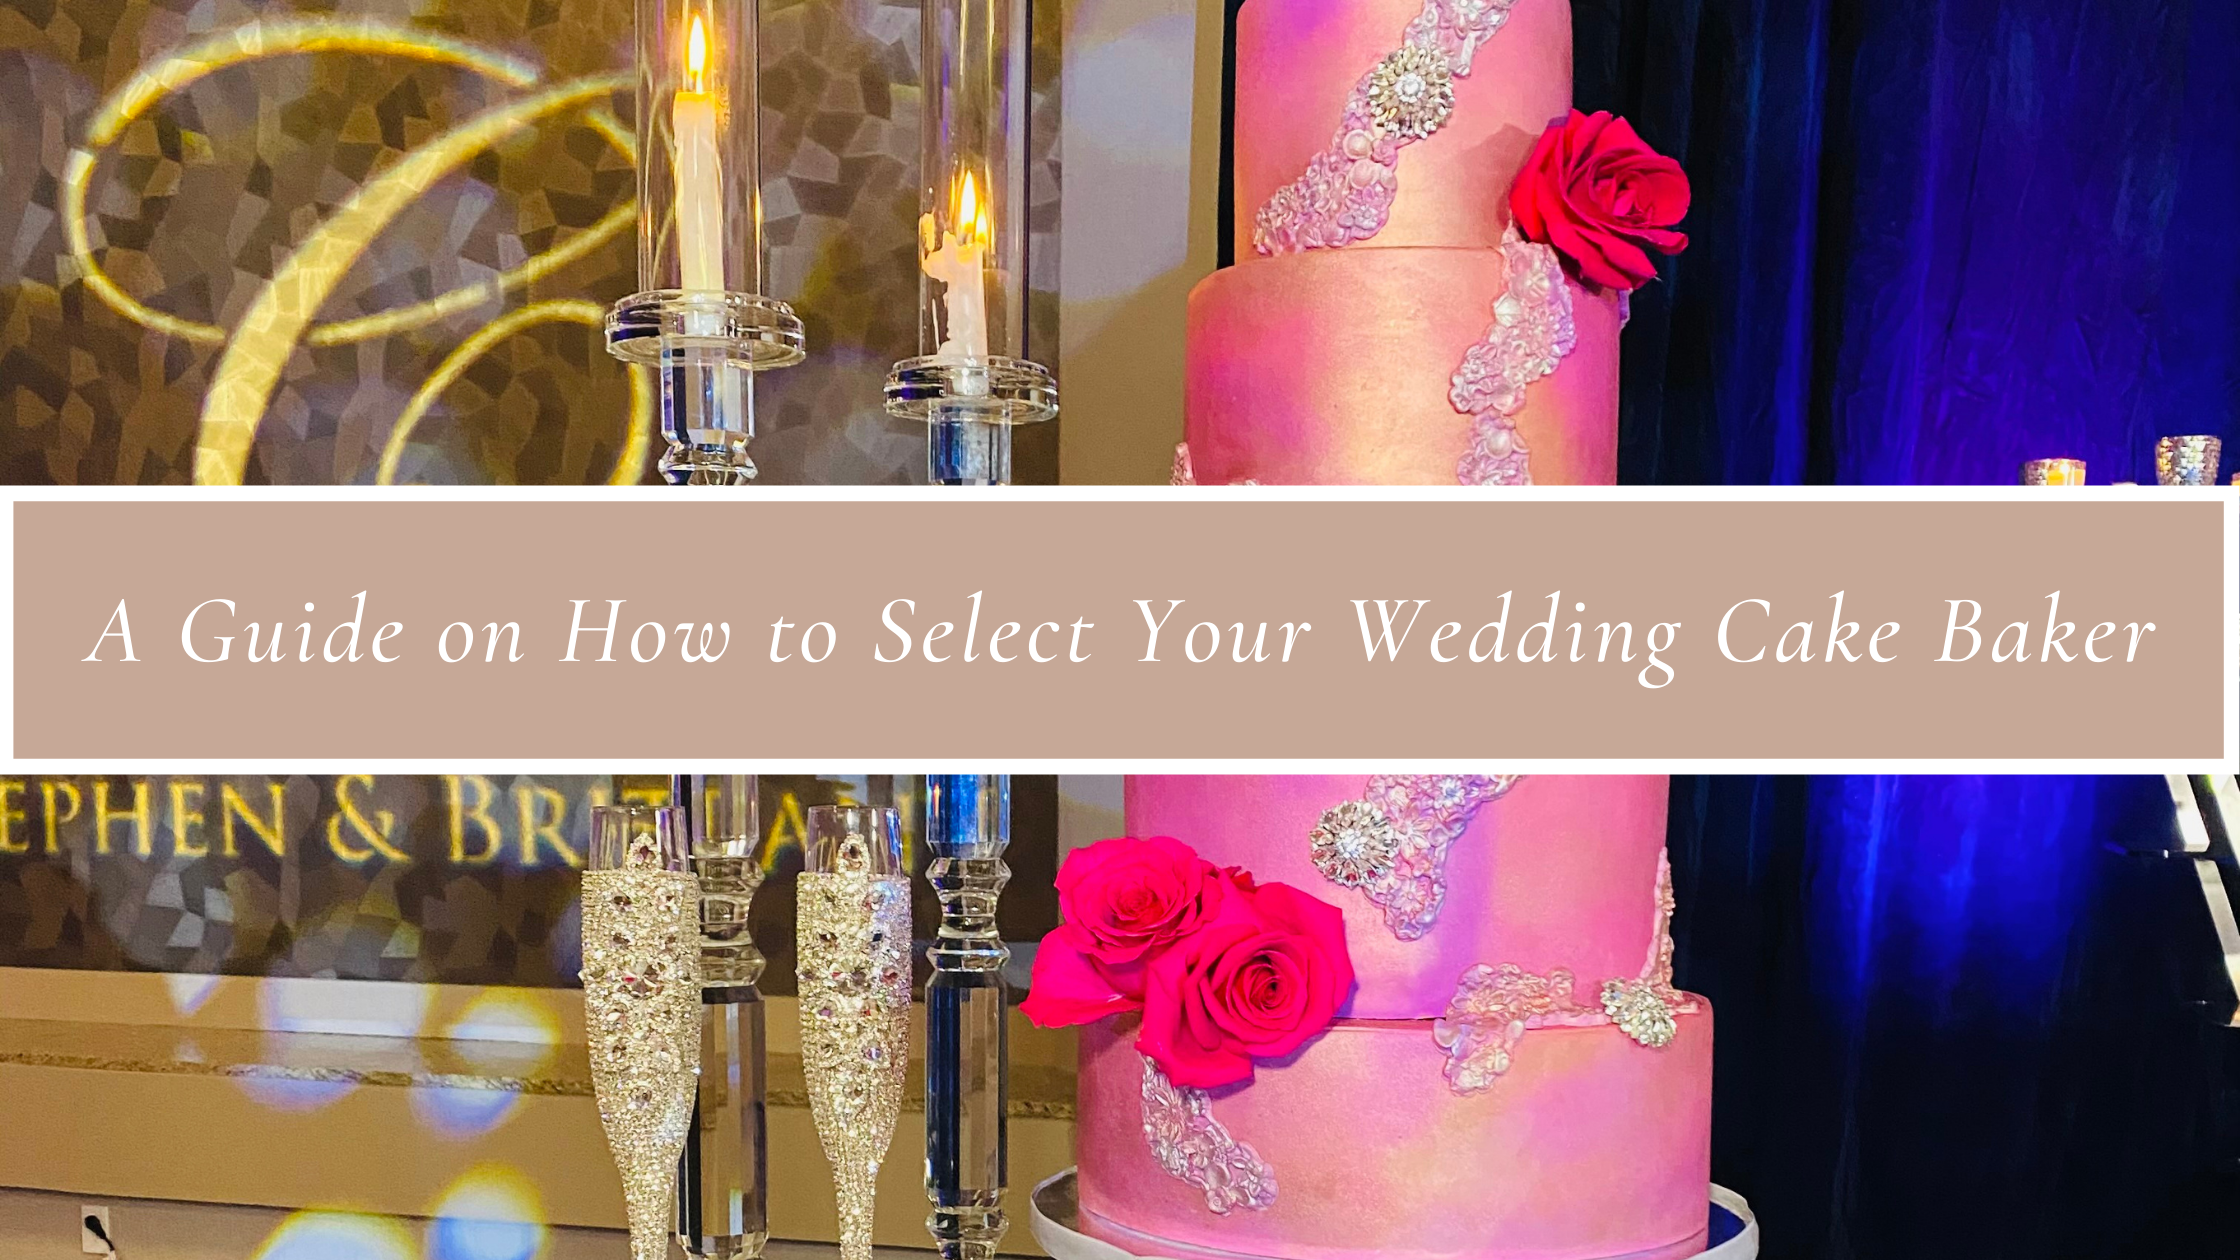 A Guide on How to Select Your Wedding Cake Baker